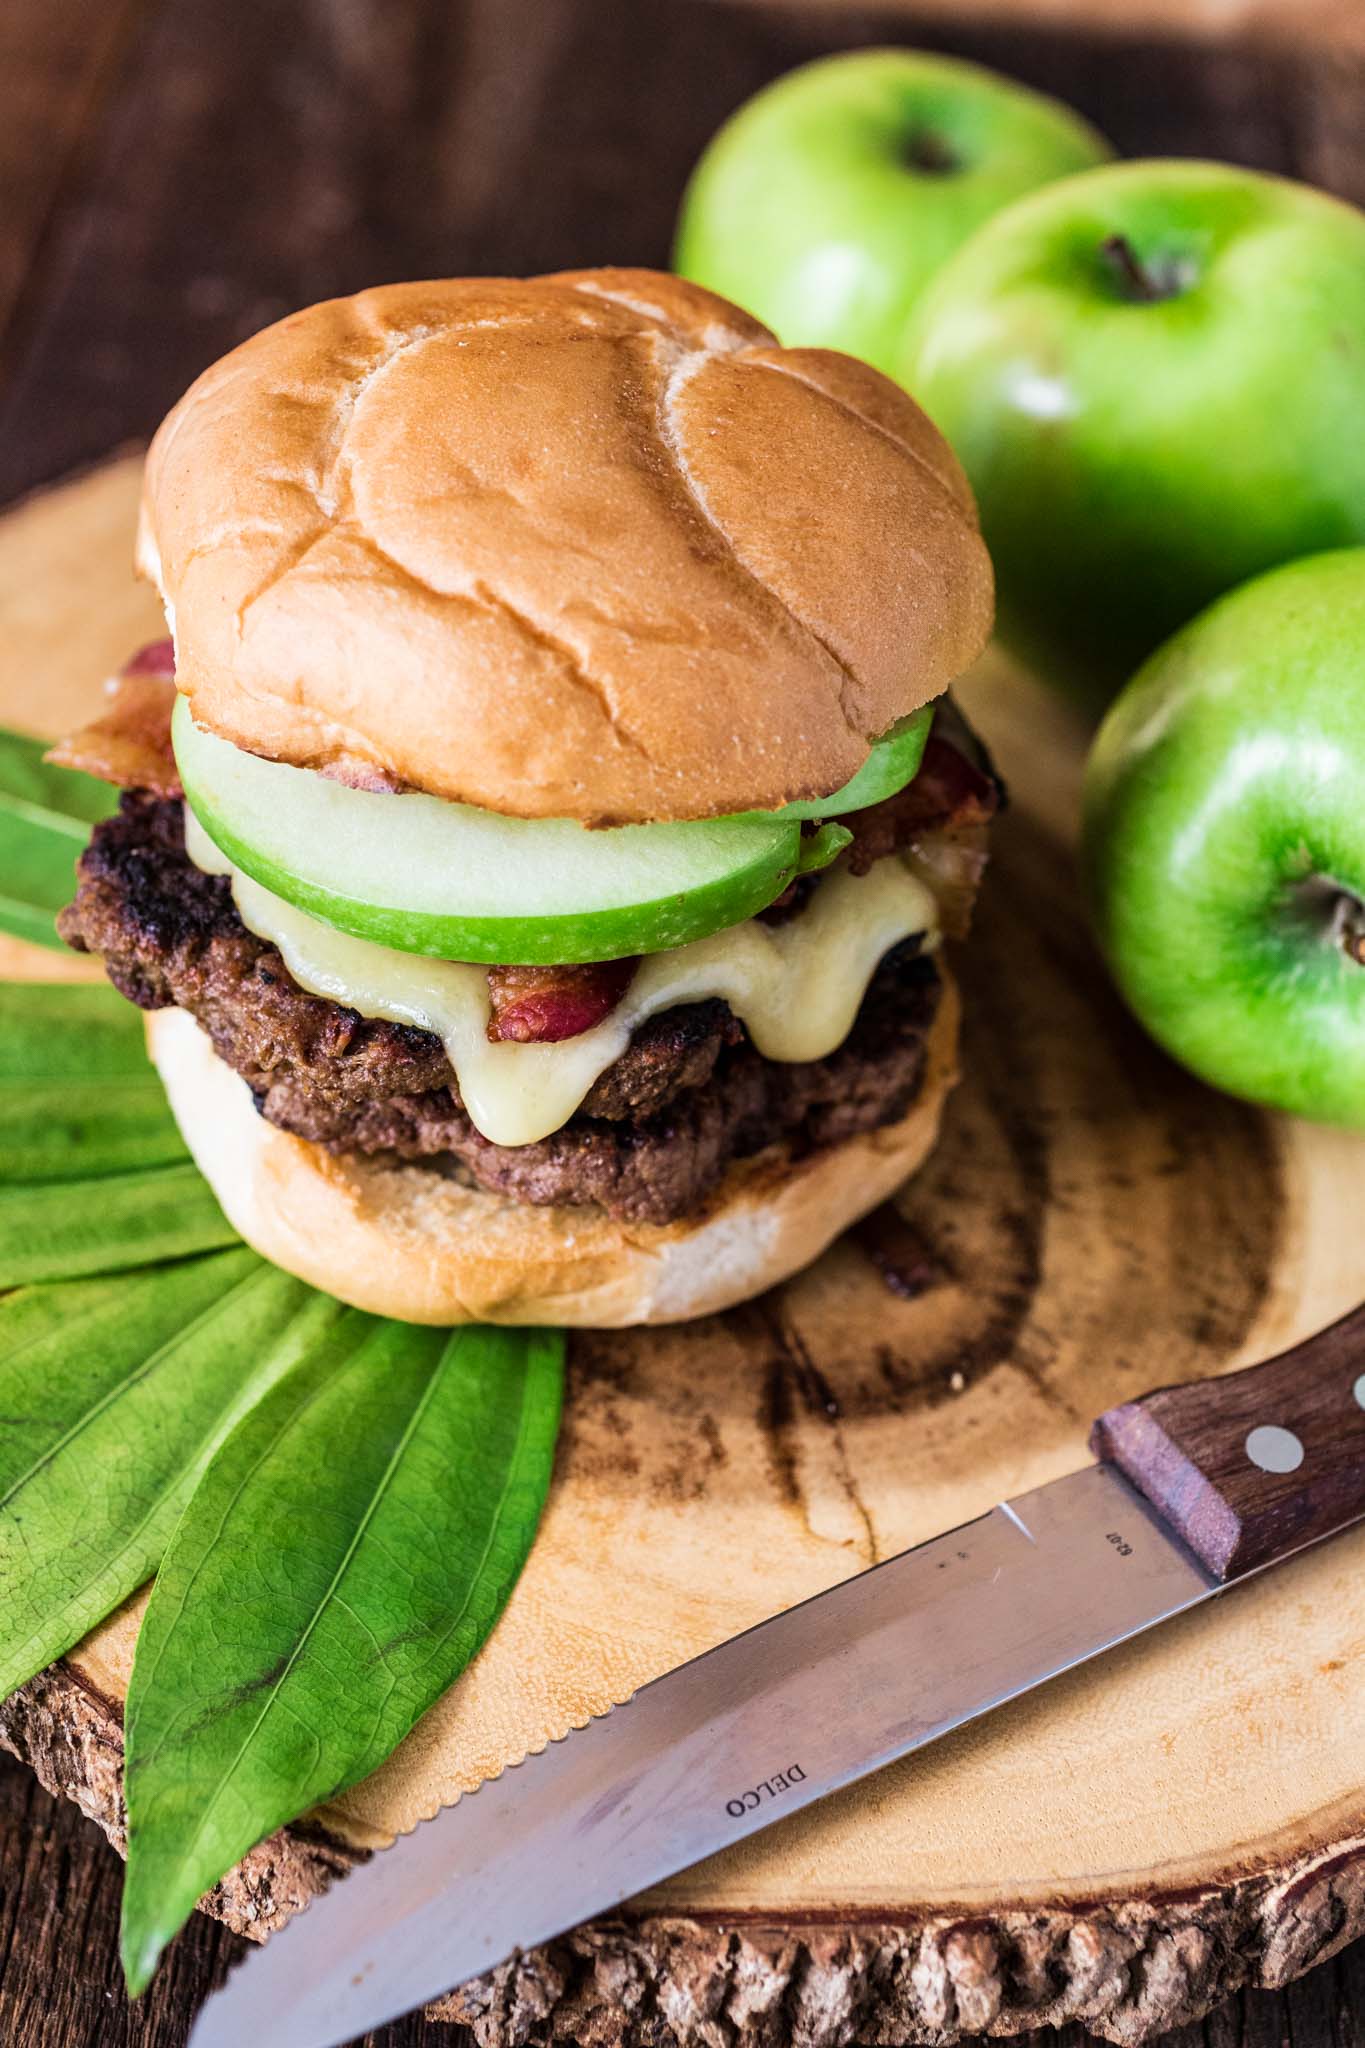 Apple, Bacon and Brie Burger | www.oliviascuisine.com | The epitome of fall, this delicious Apple, Bacon and Brie Burger will have you licking your fingers!